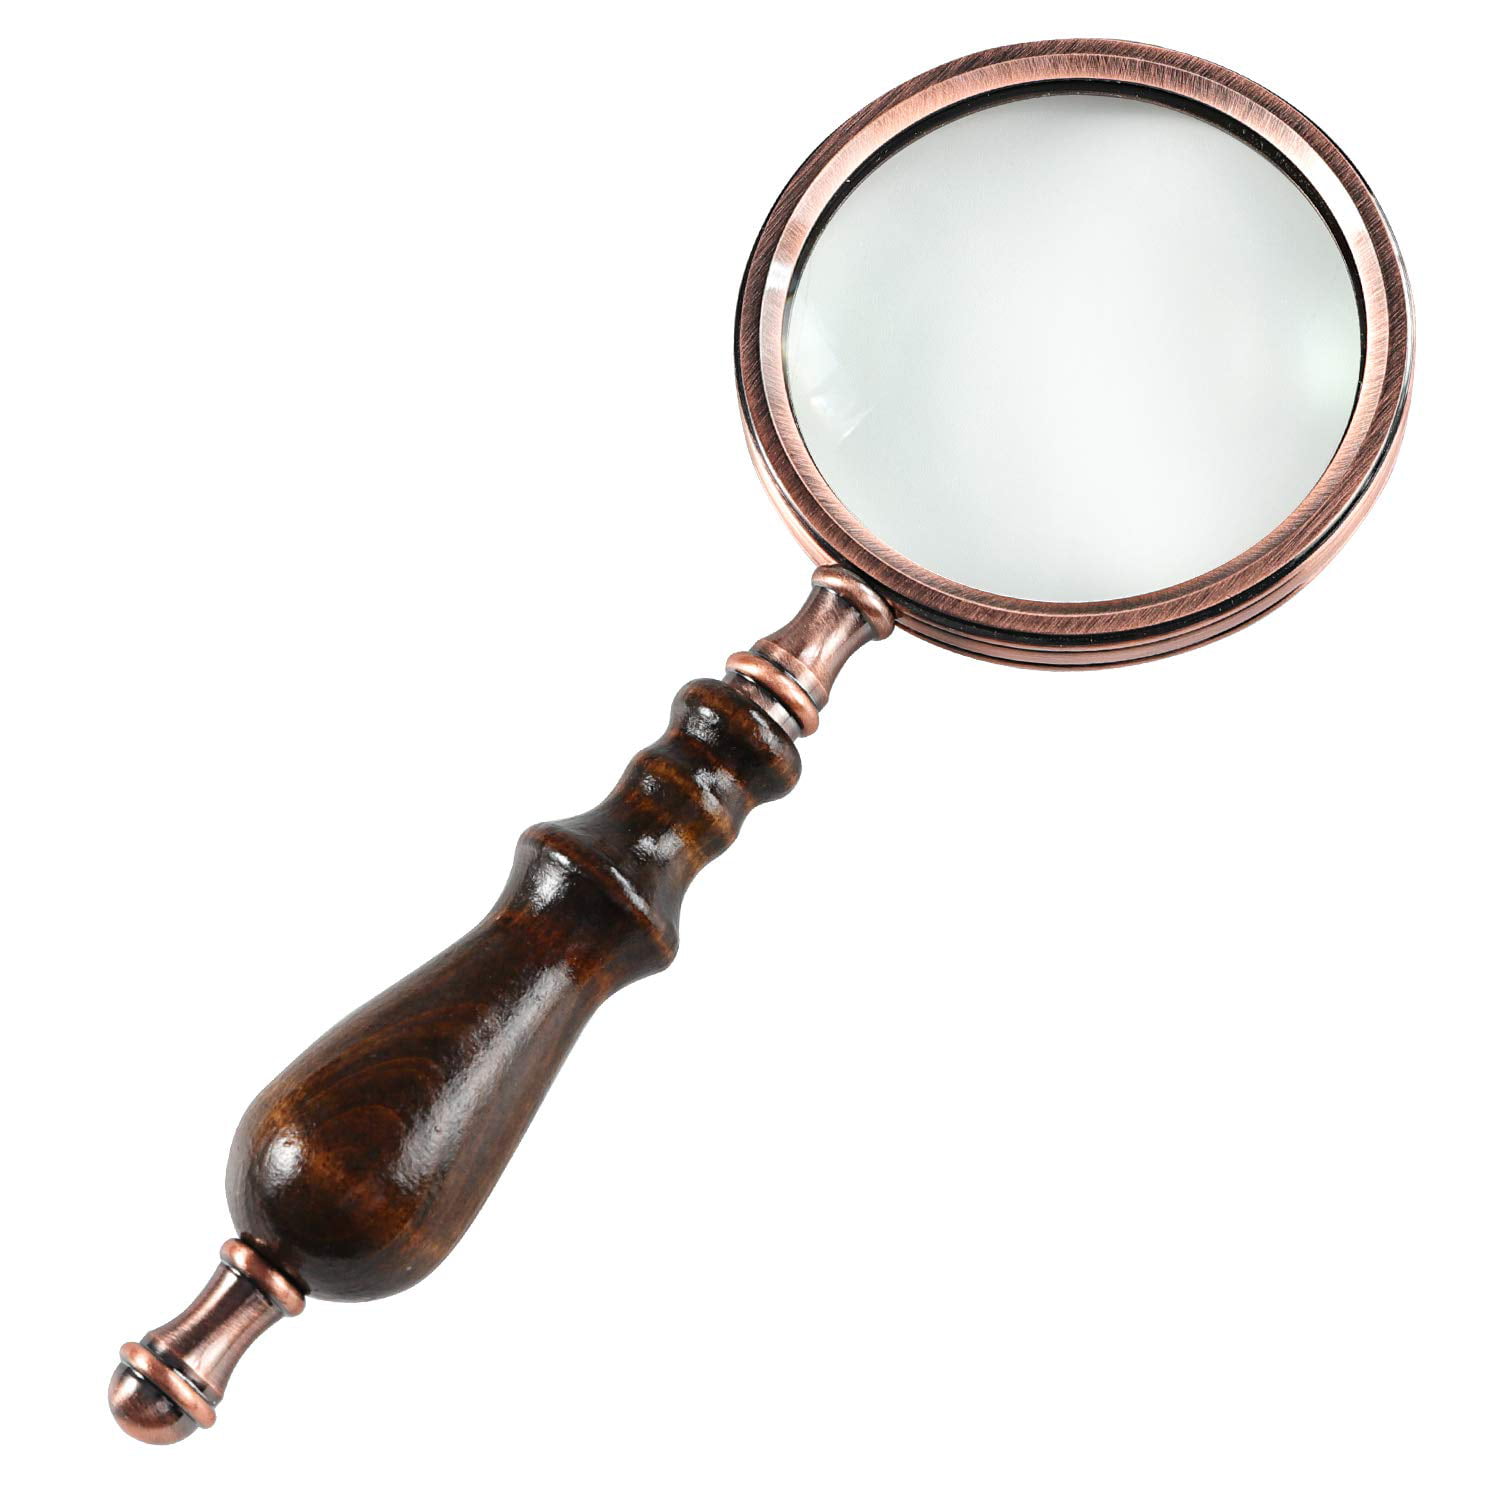 FFLSDR 10 Times Magnifying Glass Handheld Childrens Old Reading Optical Glass HD Size : 185X65mm 